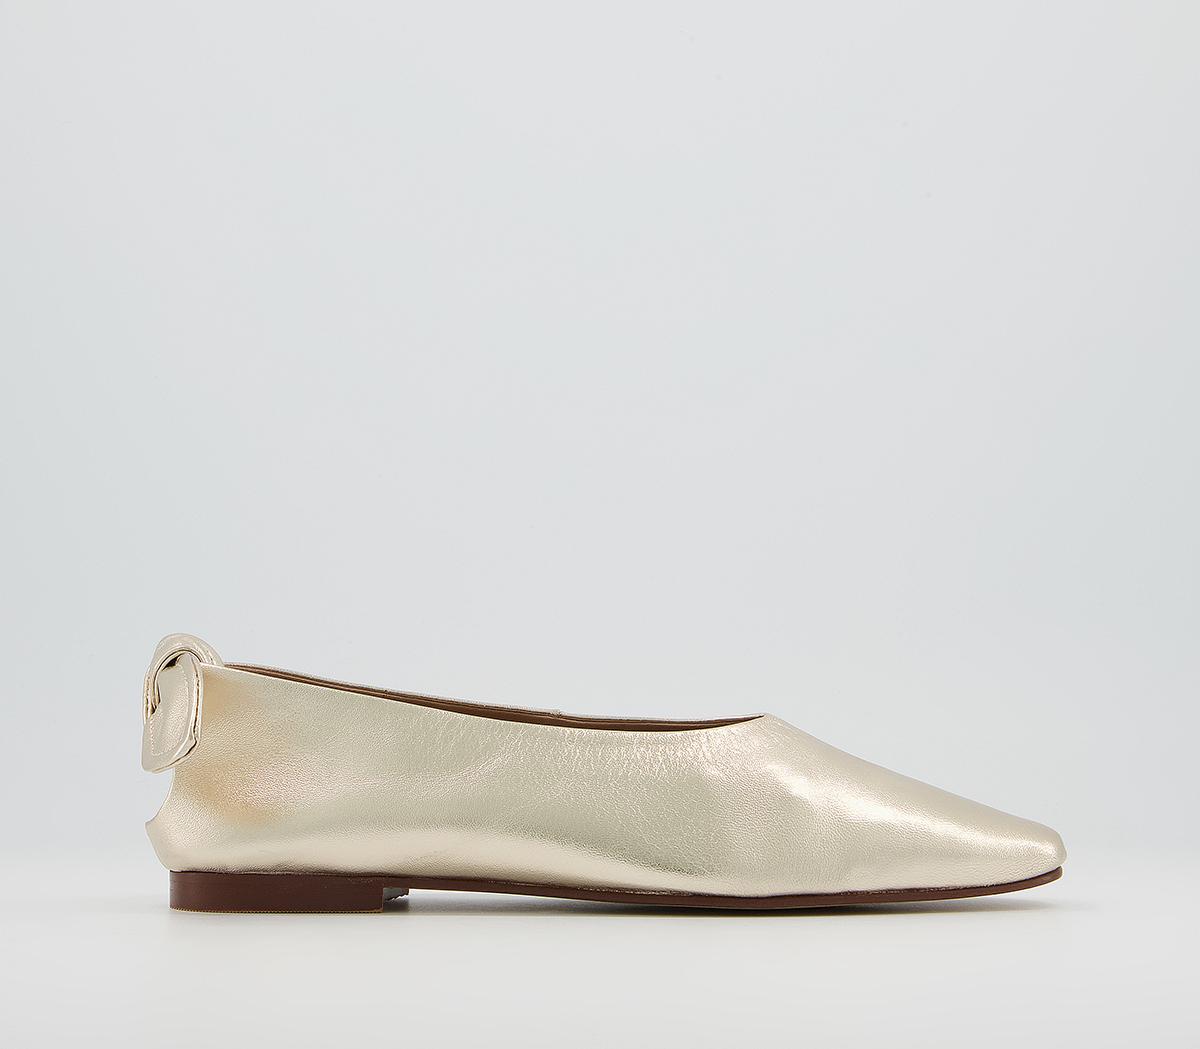 OfficeFleeting Soft Bow Square Ballet ShoesGold Metallic Leather